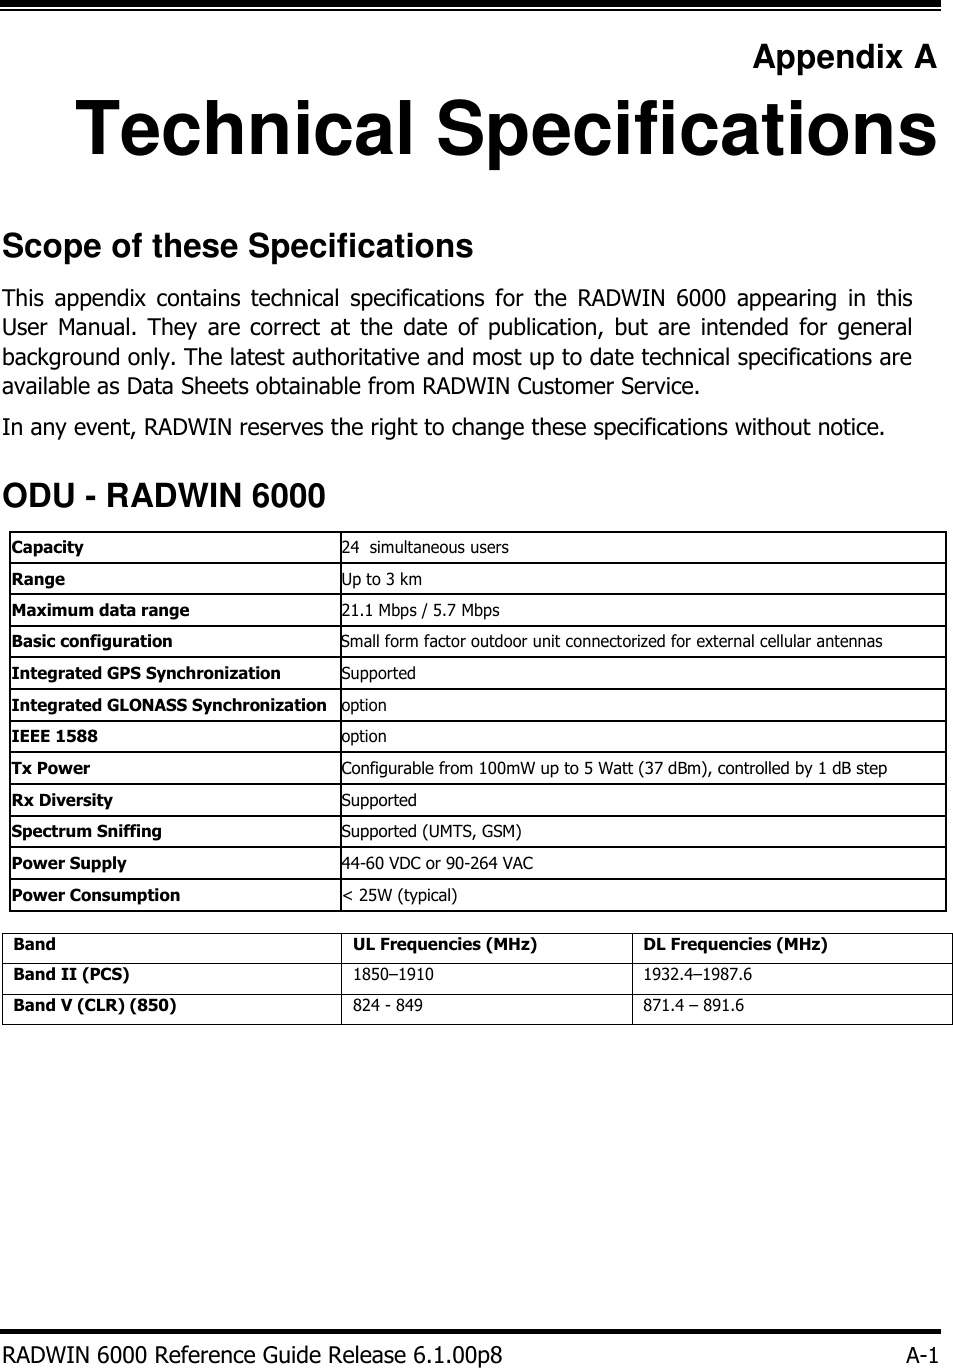           Appendix A  Technical Specifications   Scope of these Specifications  This  appendix  contains technical  specifications  for  the  RADWIN  6000  appearing  in  this User  Manual. They  are  correct  at  the  date  of  publication,  but  are  intended  for  general background only. The latest authoritative and most up to date technical specifications are available as Data Sheets obtainable from RADWIN Customer Service.  In any event, RADWIN reserves the right to change these specifications without notice.  ODU - RADWIN 6000   Capacity 24  simultaneous users  Range Up to 3 km  Maximum data range 21.1 Mbps / 5.7 Mbps  Basic configuration Small form factor outdoor unit connectorized for external cellular antennas   Integrated GPS Synchronization Supported  Integrated GLONASS Synchronization option  IEEE 1588  option  Tx Power  Configurable from 100mW up to 5 Watt (37 dBm), controlled by 1 dB step  Rx Diversity  Supported  Spectrum Sniffing  Supported (UMTS, GSM)  Power Supply  44-60 VDC or 90-264 VAC  Power Consumption  &lt; 25W (typical)   Band UL Frequencies (MHz) DL Frequencies (MHz) Band II (PCS)  1850–1910  1932.4–1987.6 Band V (CLR) (850)  824 - 849 871.4 – 891.6              RADWIN 6000 Reference Guide Release 6.1.00p8 A-1 